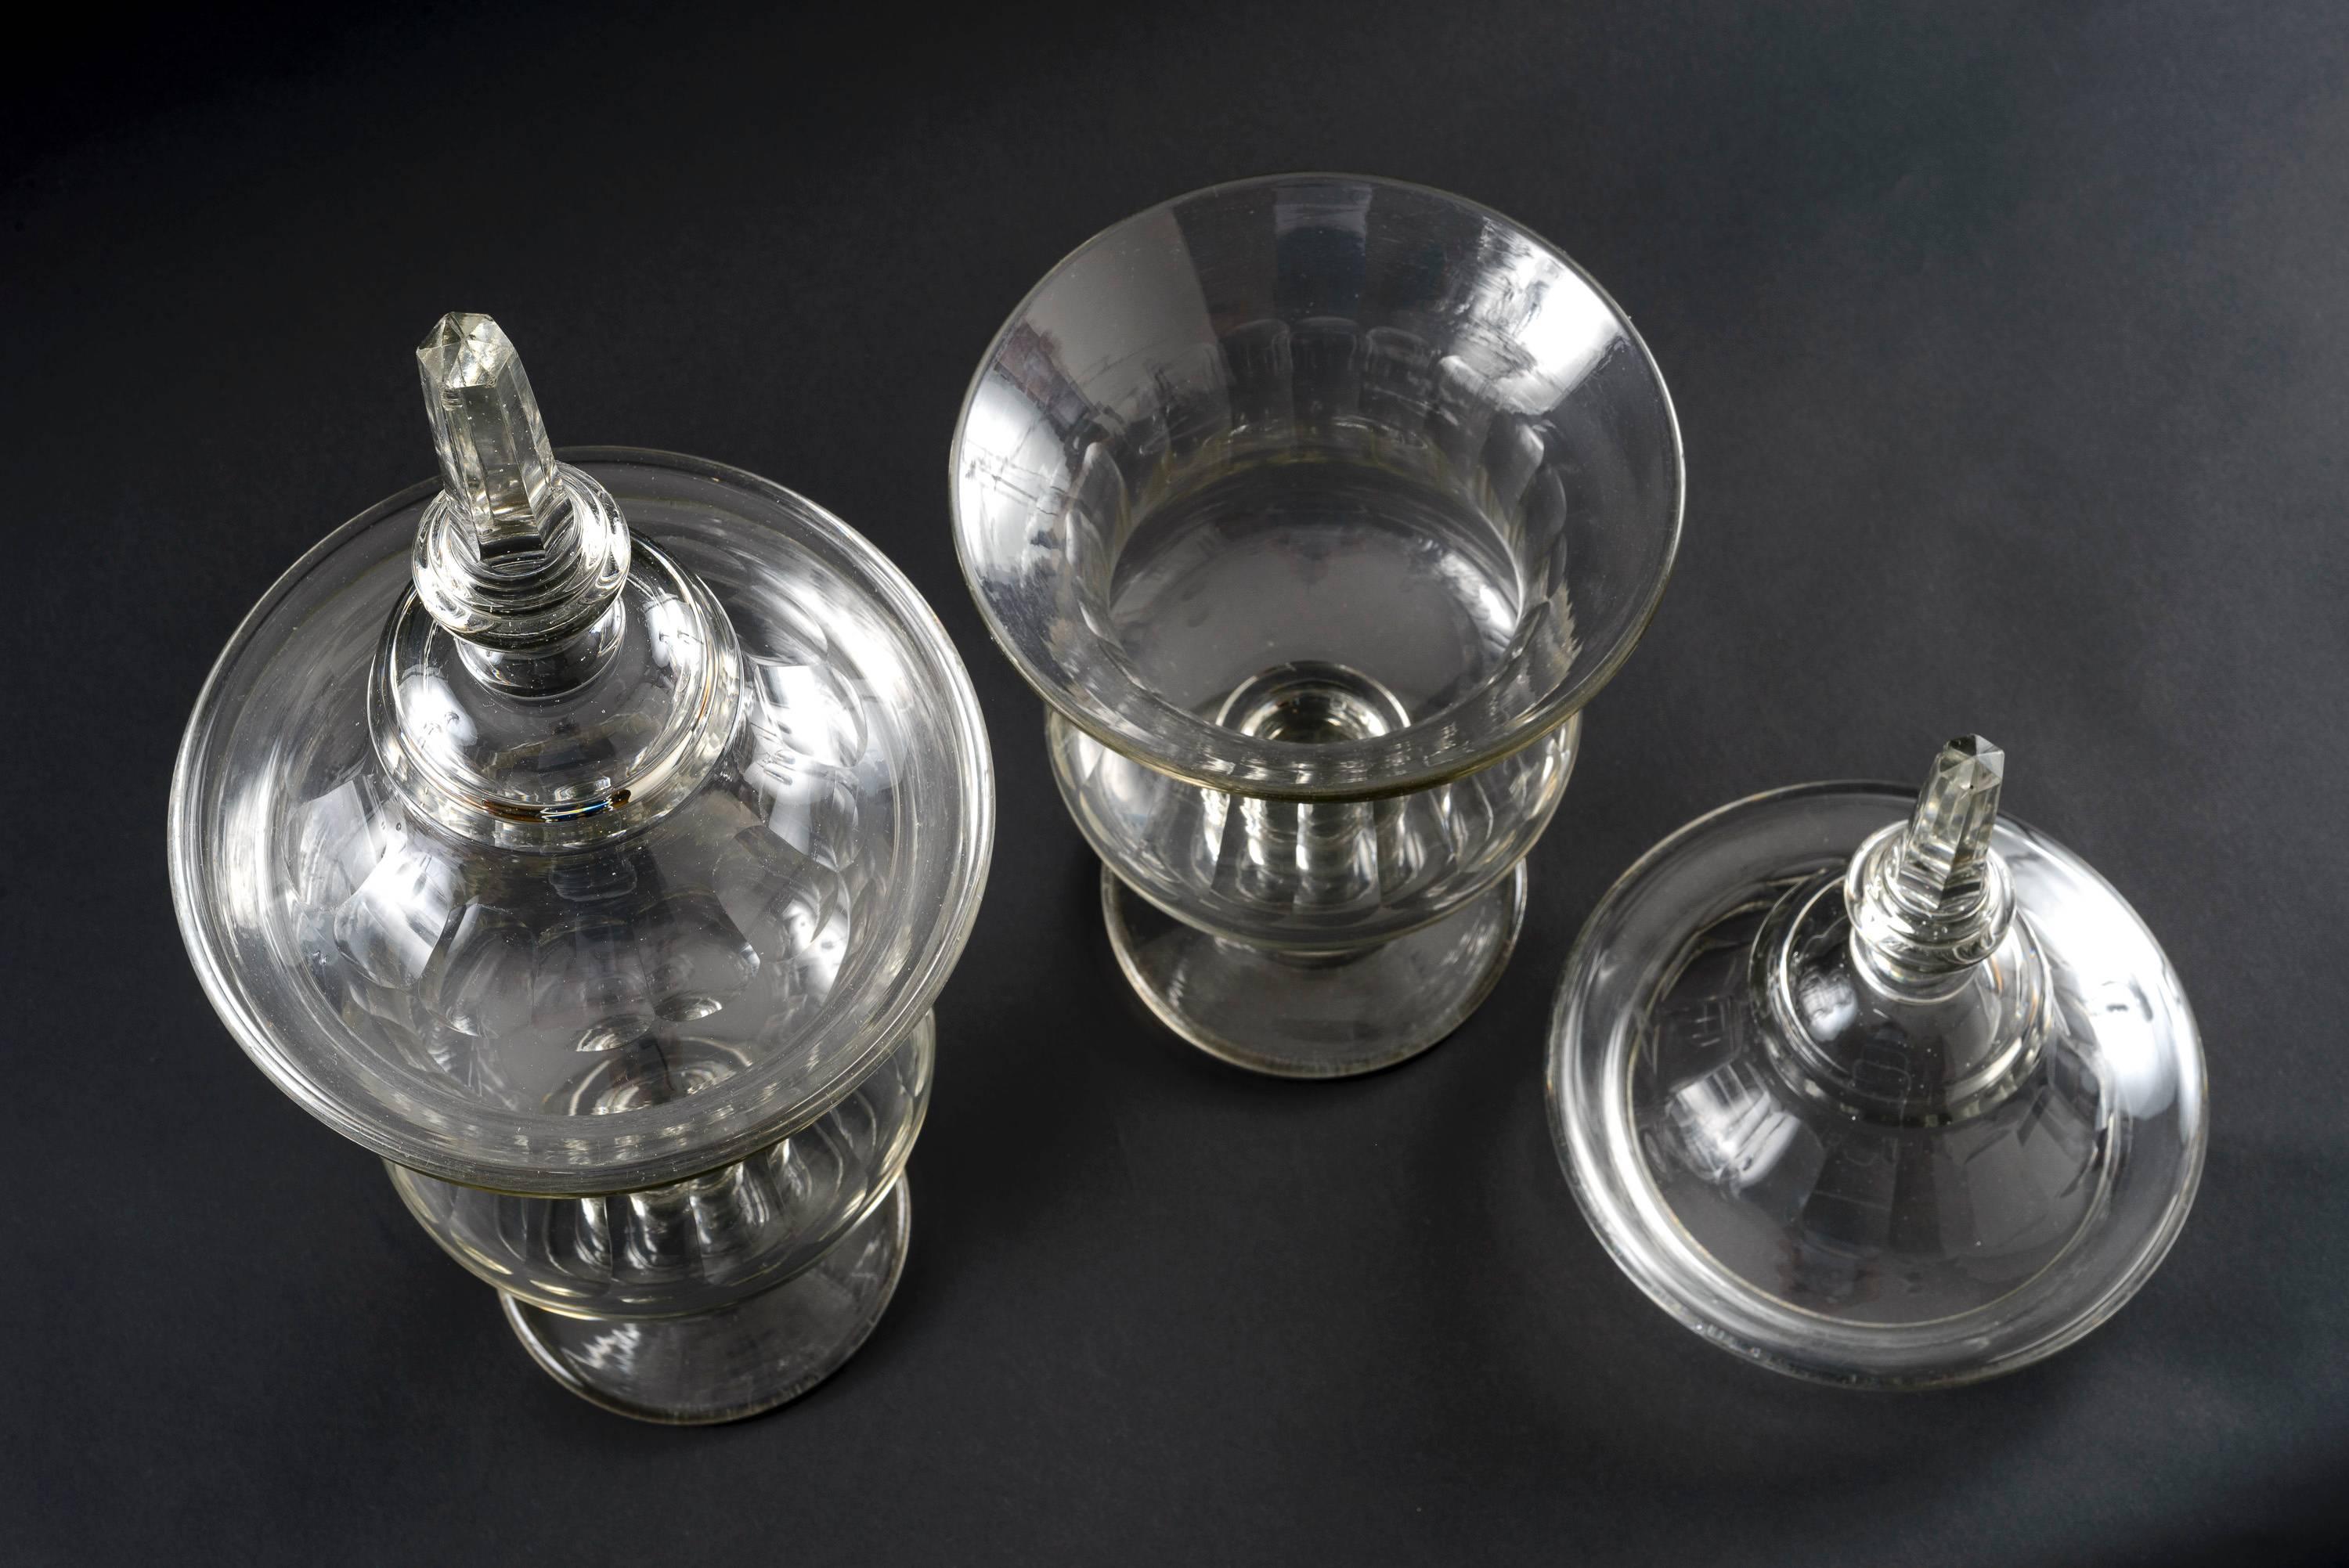 cut glass apothecary jars antique